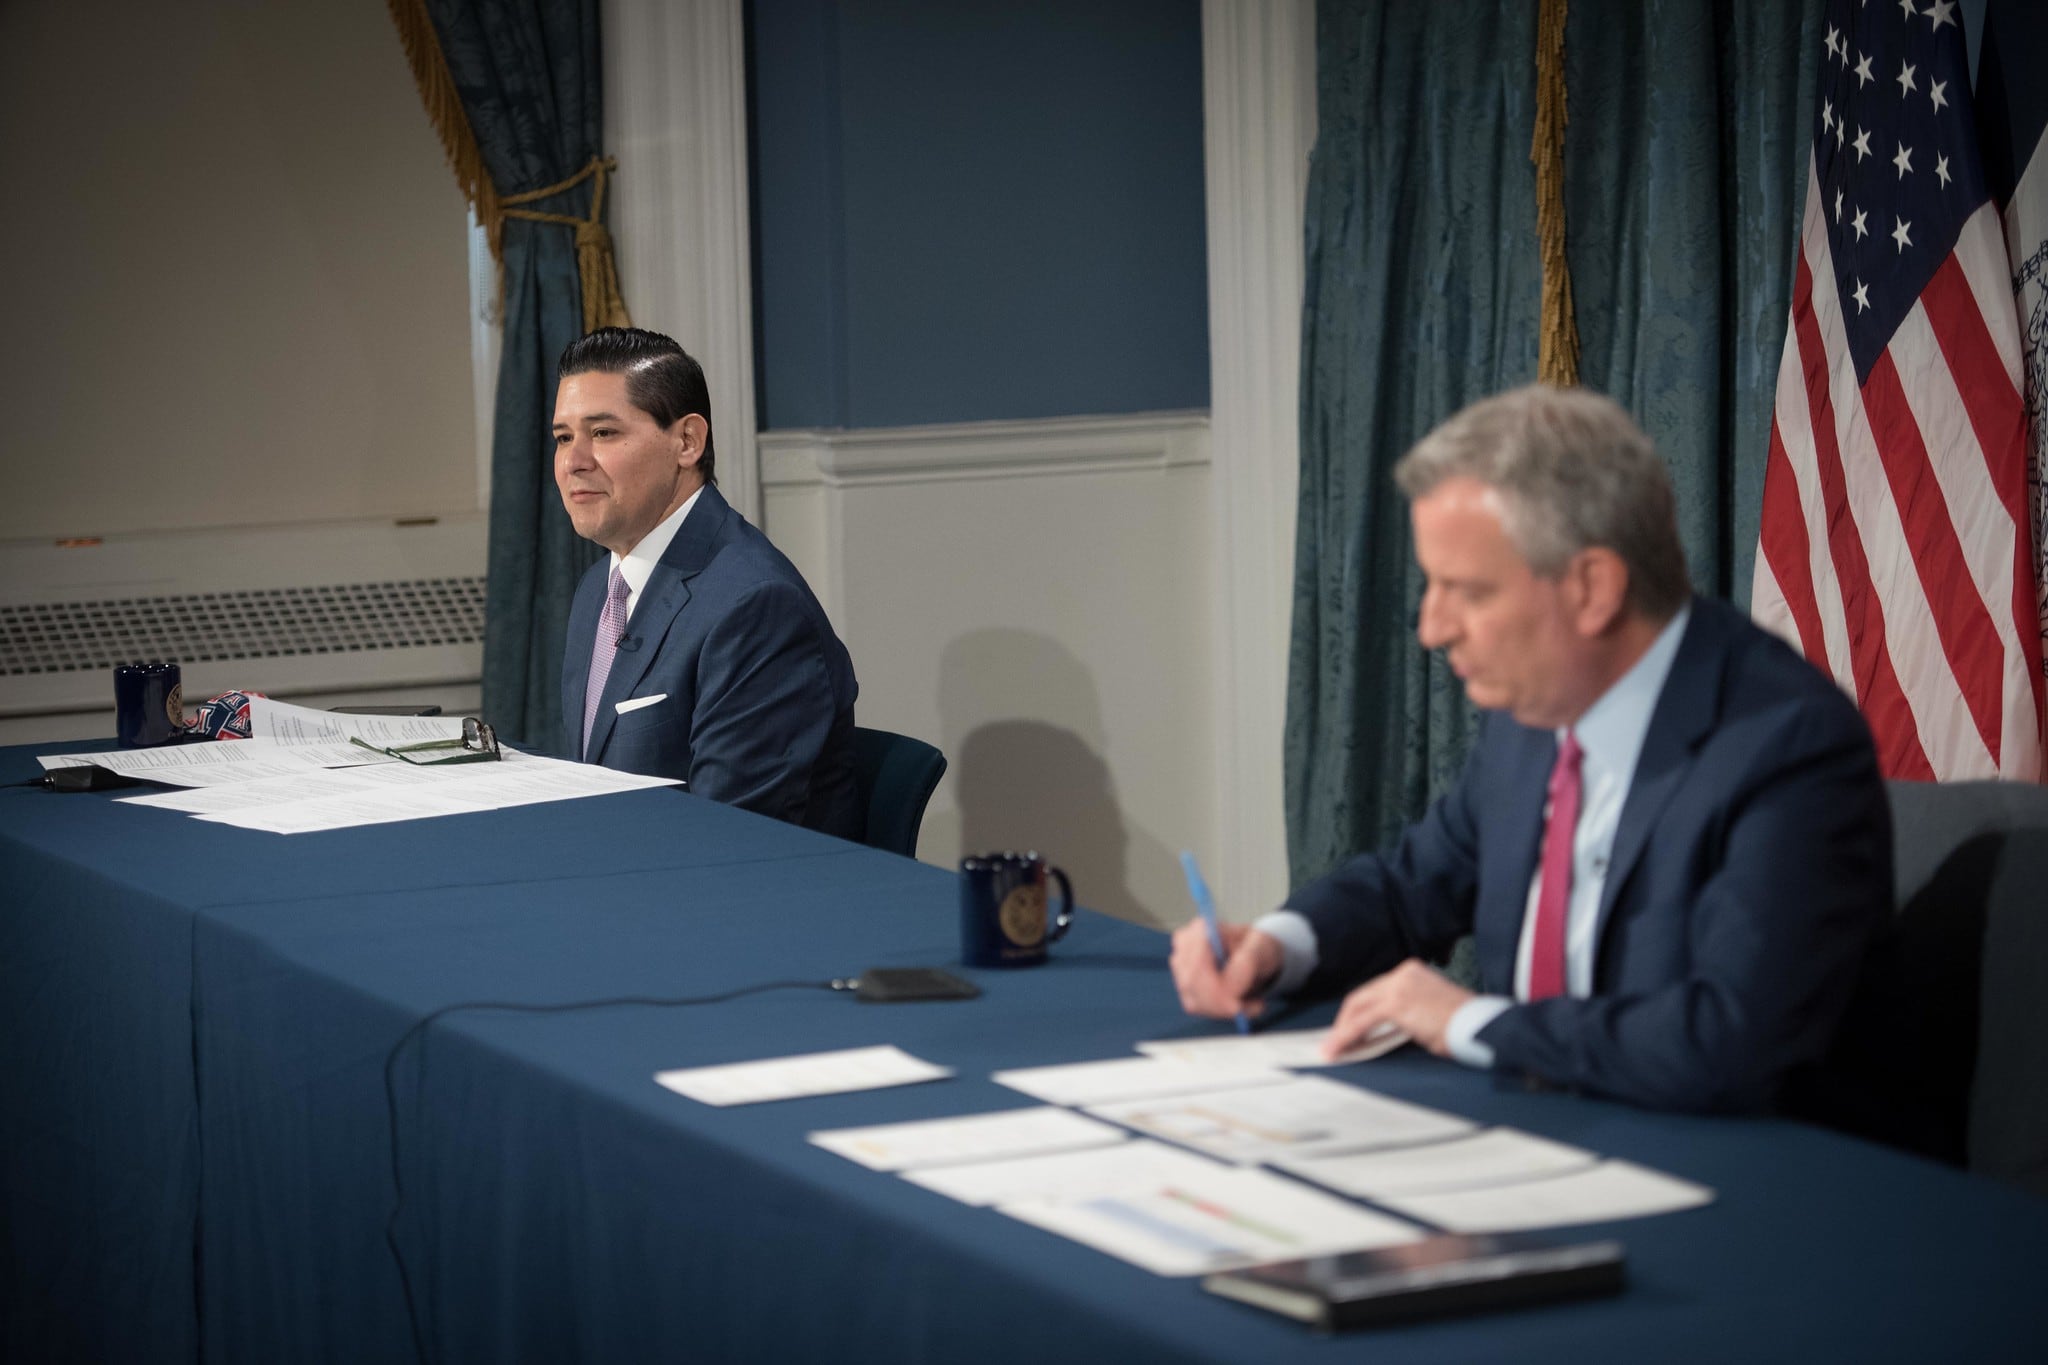 Schools Chancellor Richard Carranza (left) and Mayor Bill de Blasio answer questions about summer school during a press conference at City Hall.